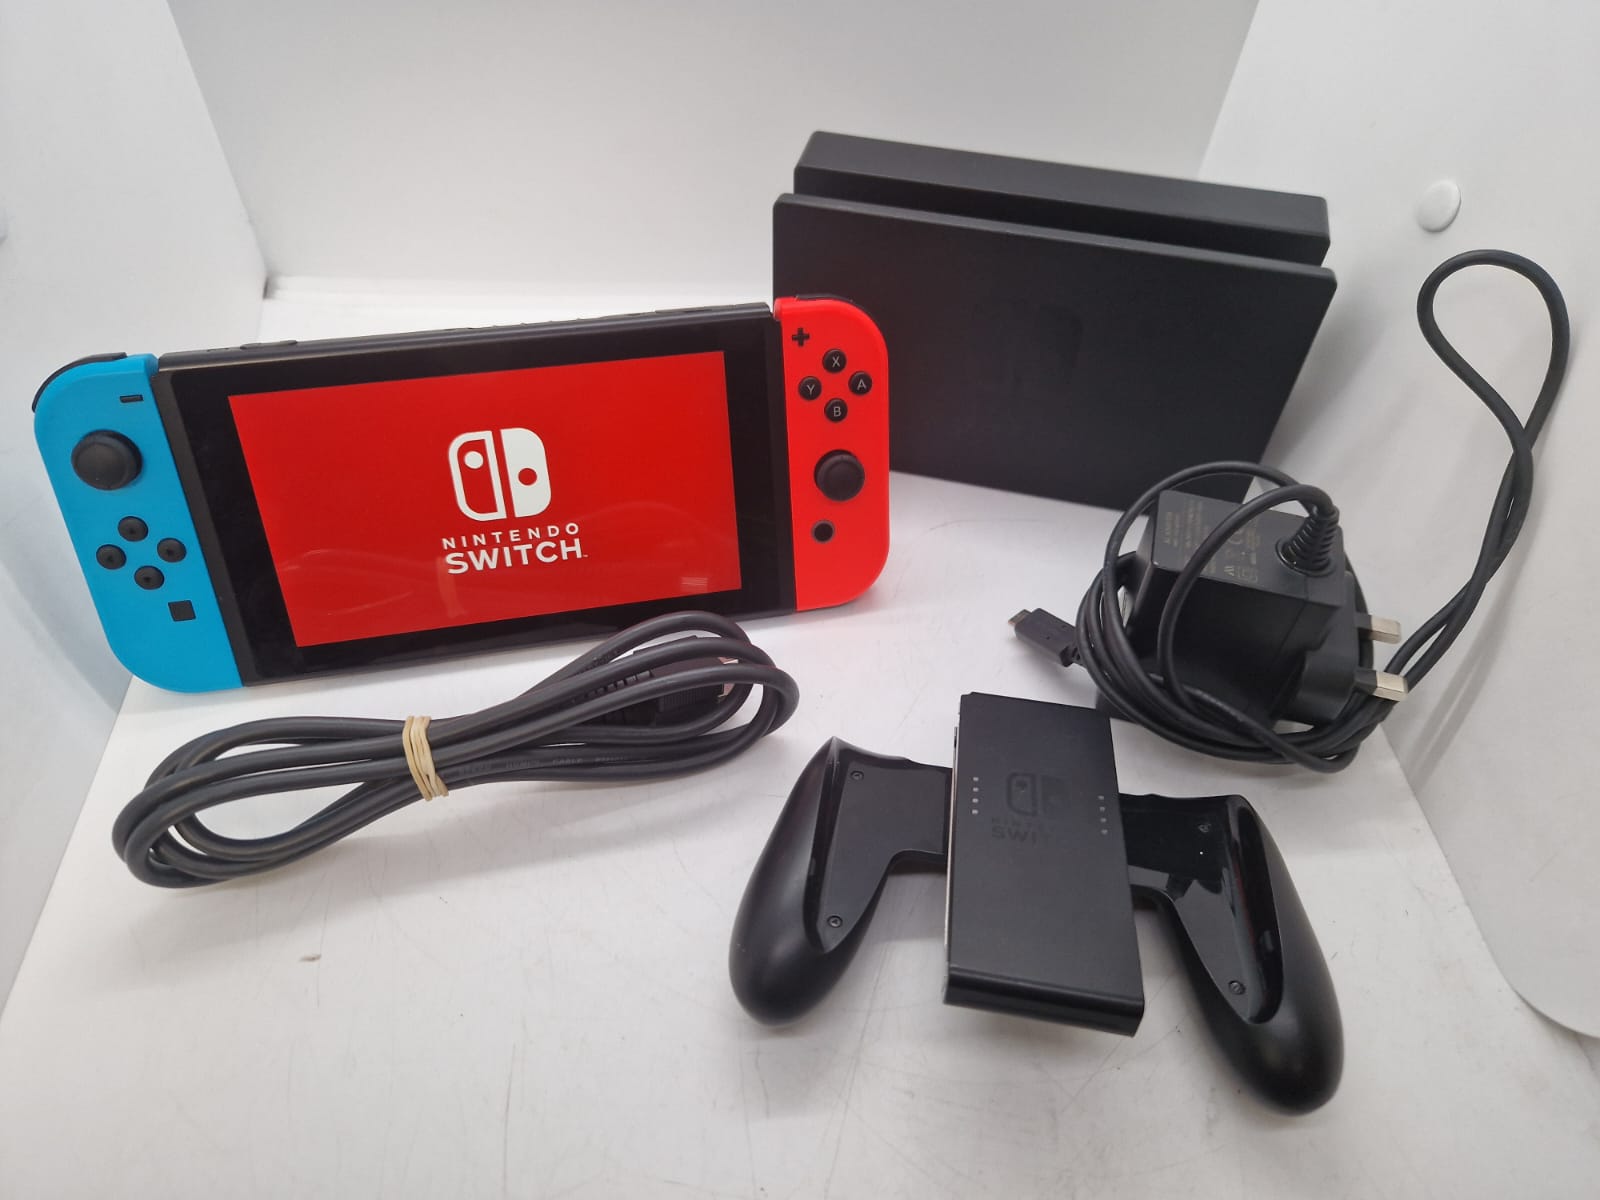 Nintendo Switch 32 GB Console - Neon Blue and Red